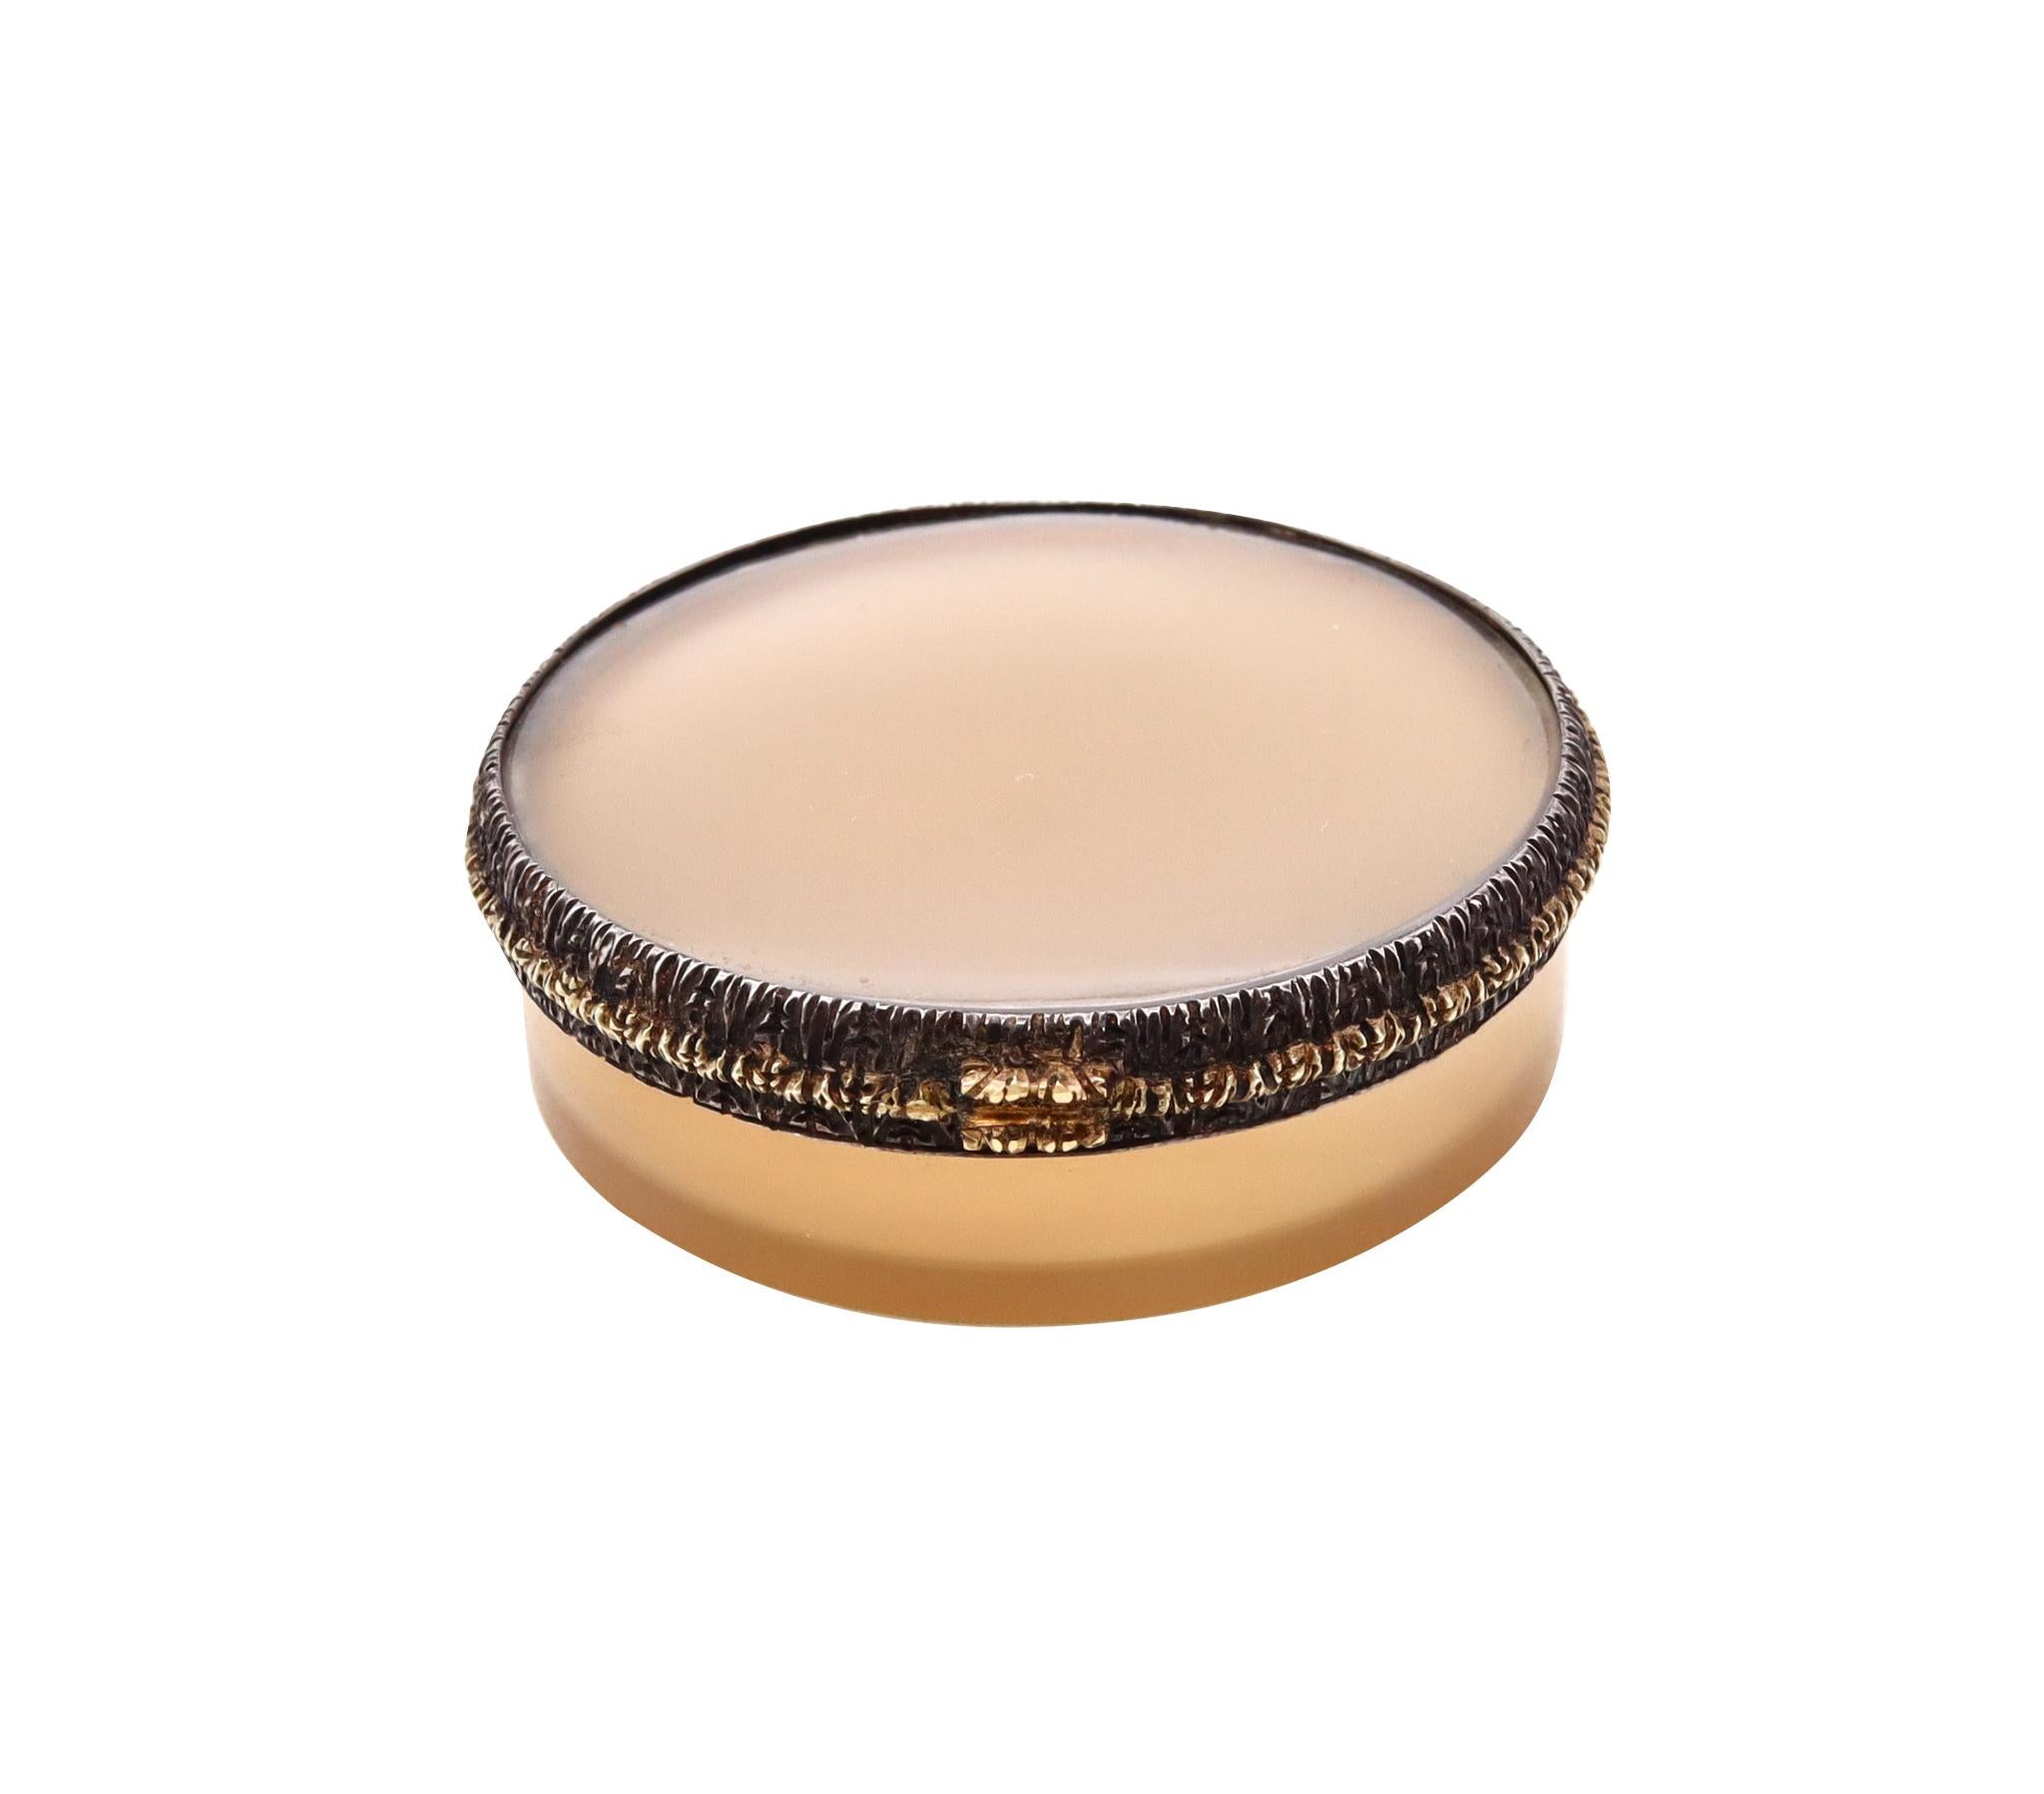 French snuffbox from the late 18th century.

Beautiful antique piece, made in France during the late 18th century, circa 1790's. It was carefully carved with impeccable precision, from a single piece of translucent gray agate. The two parts are